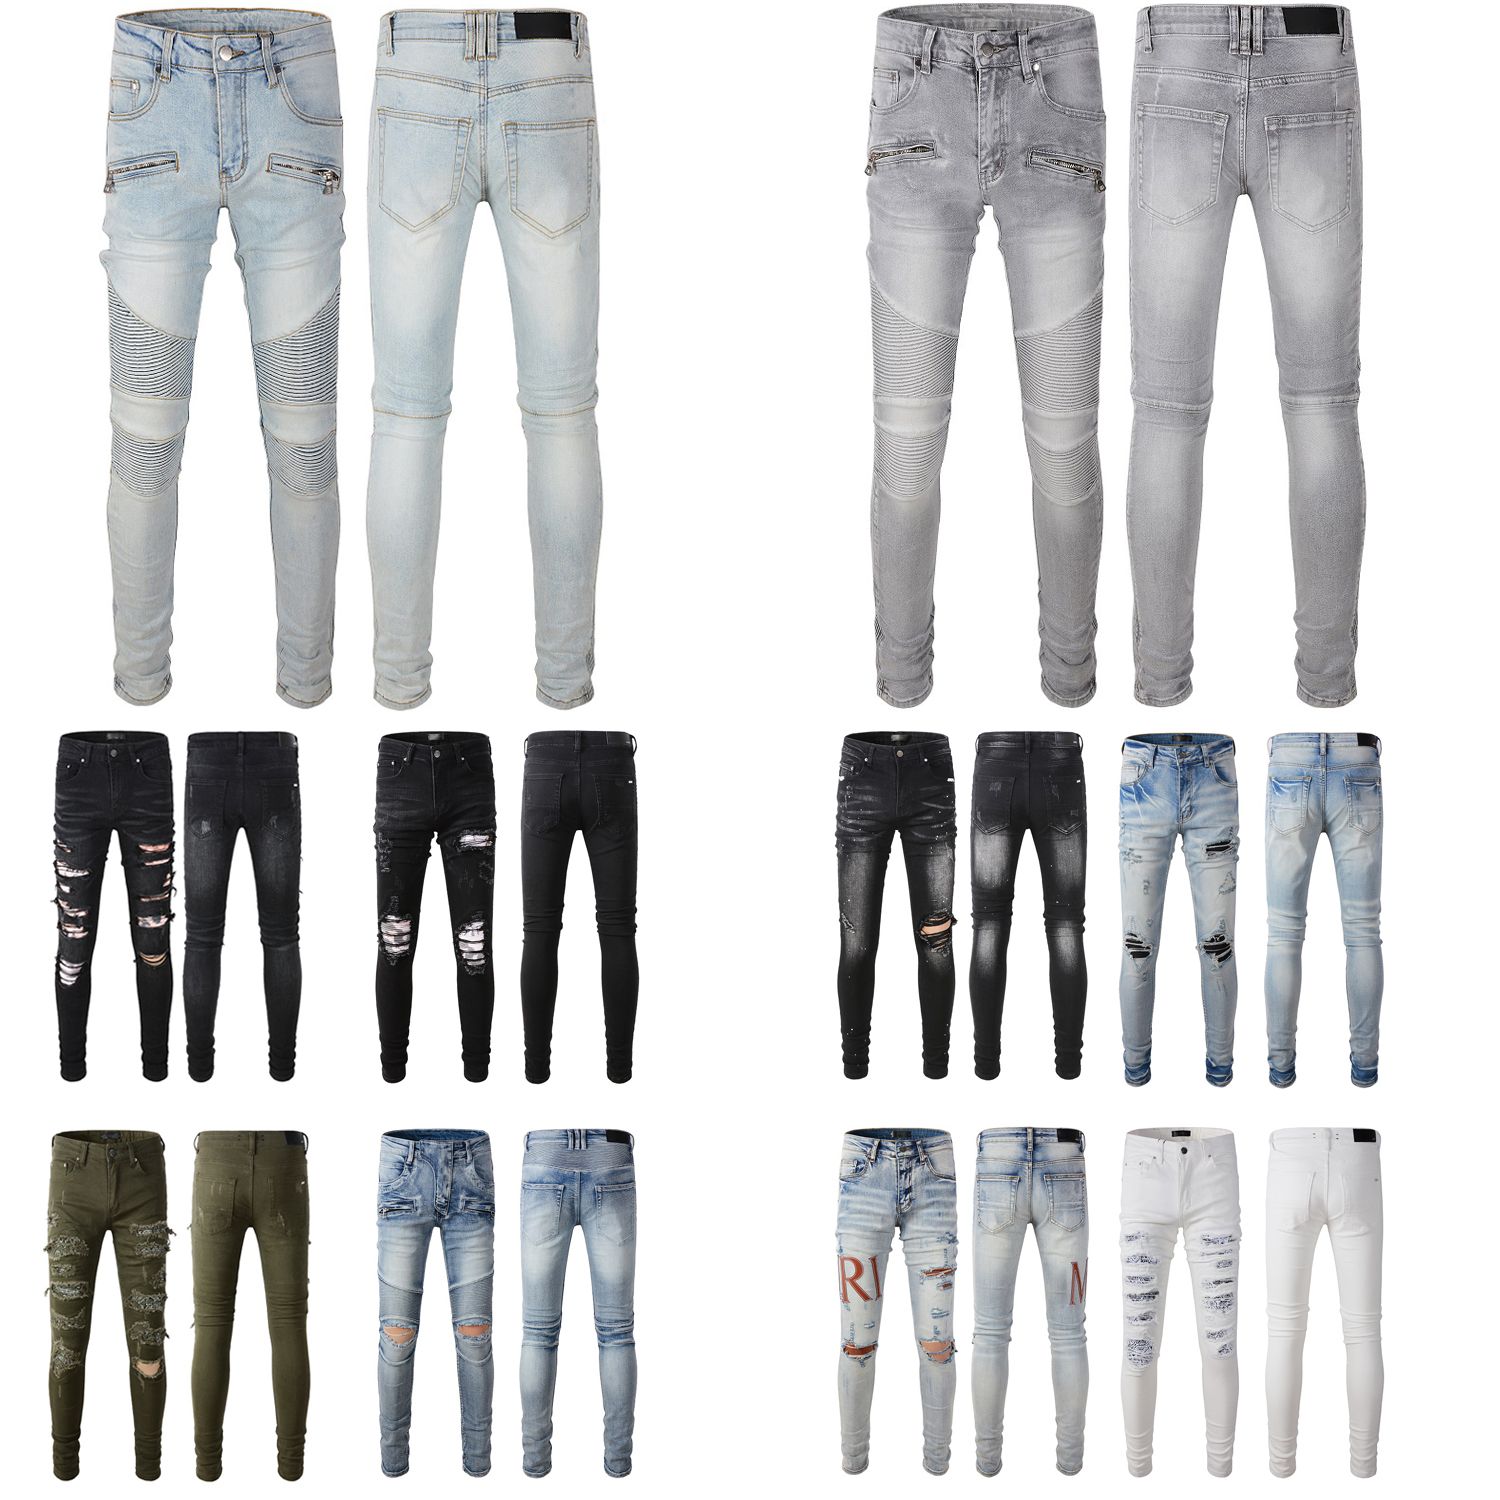 High Quality Ripped Slim Fit for Men Denim Jeans - China Replica